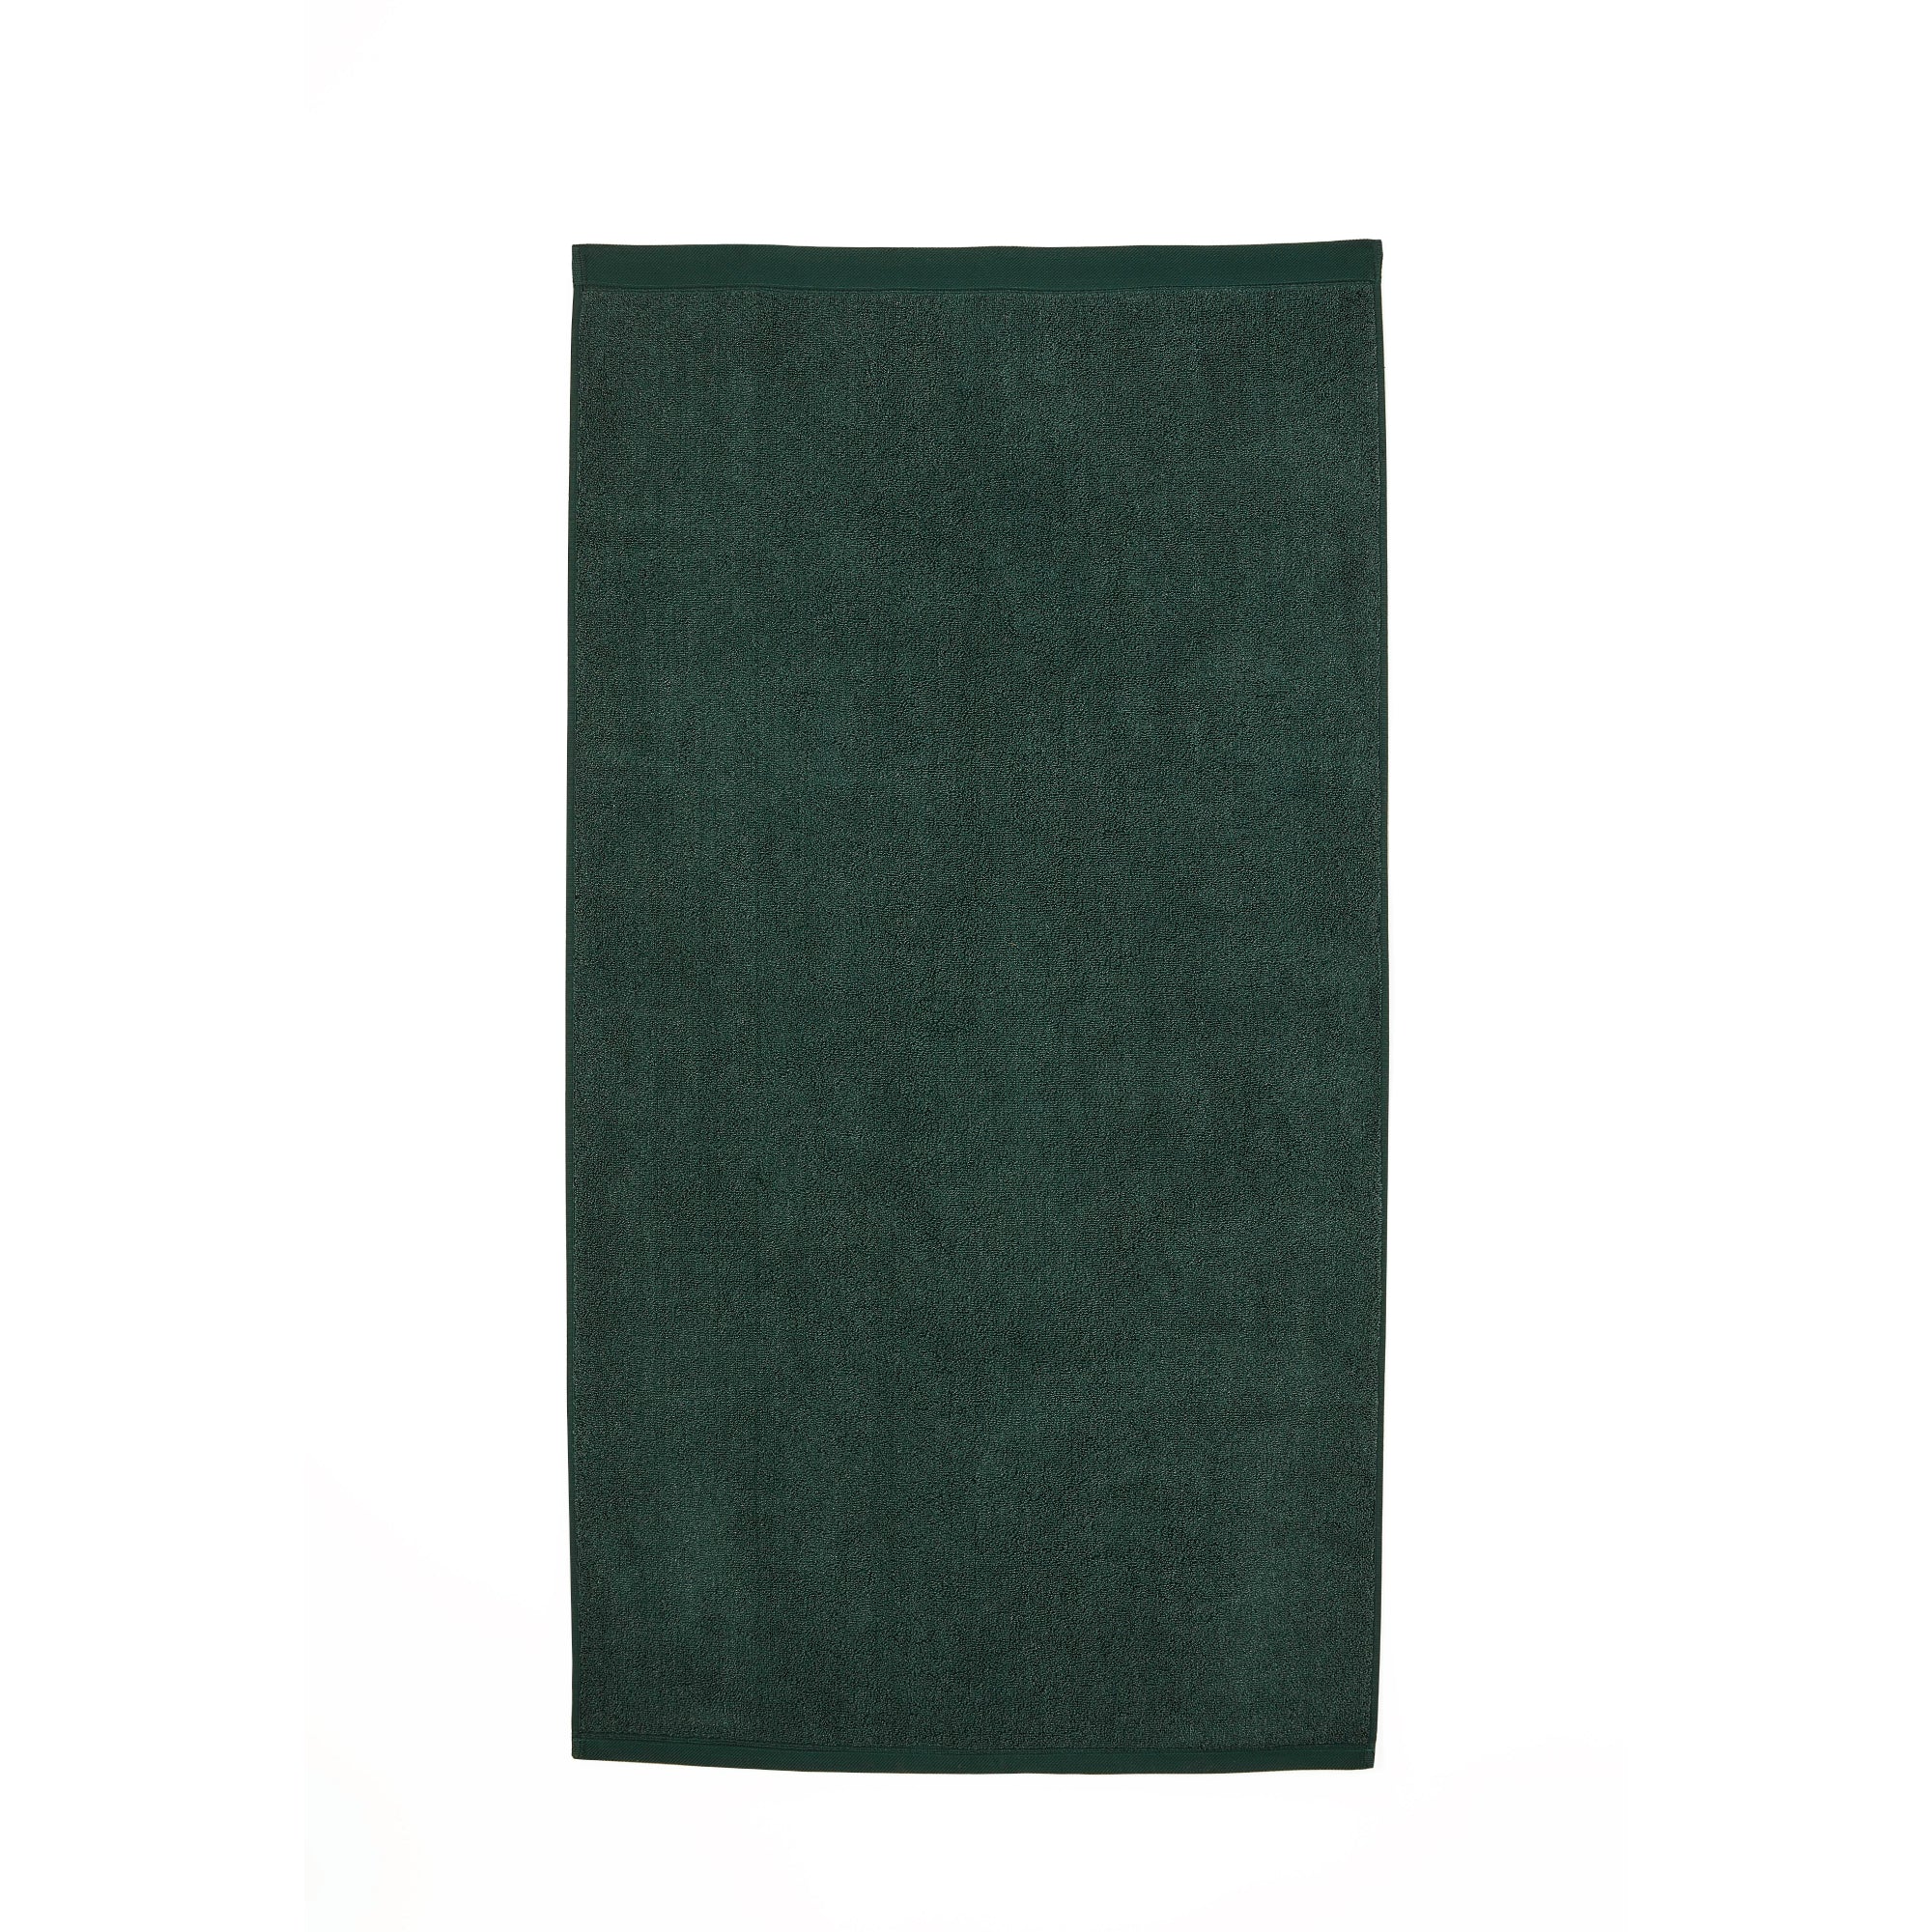 Hand Towel Abode Eco by Drift Home in Deep Green